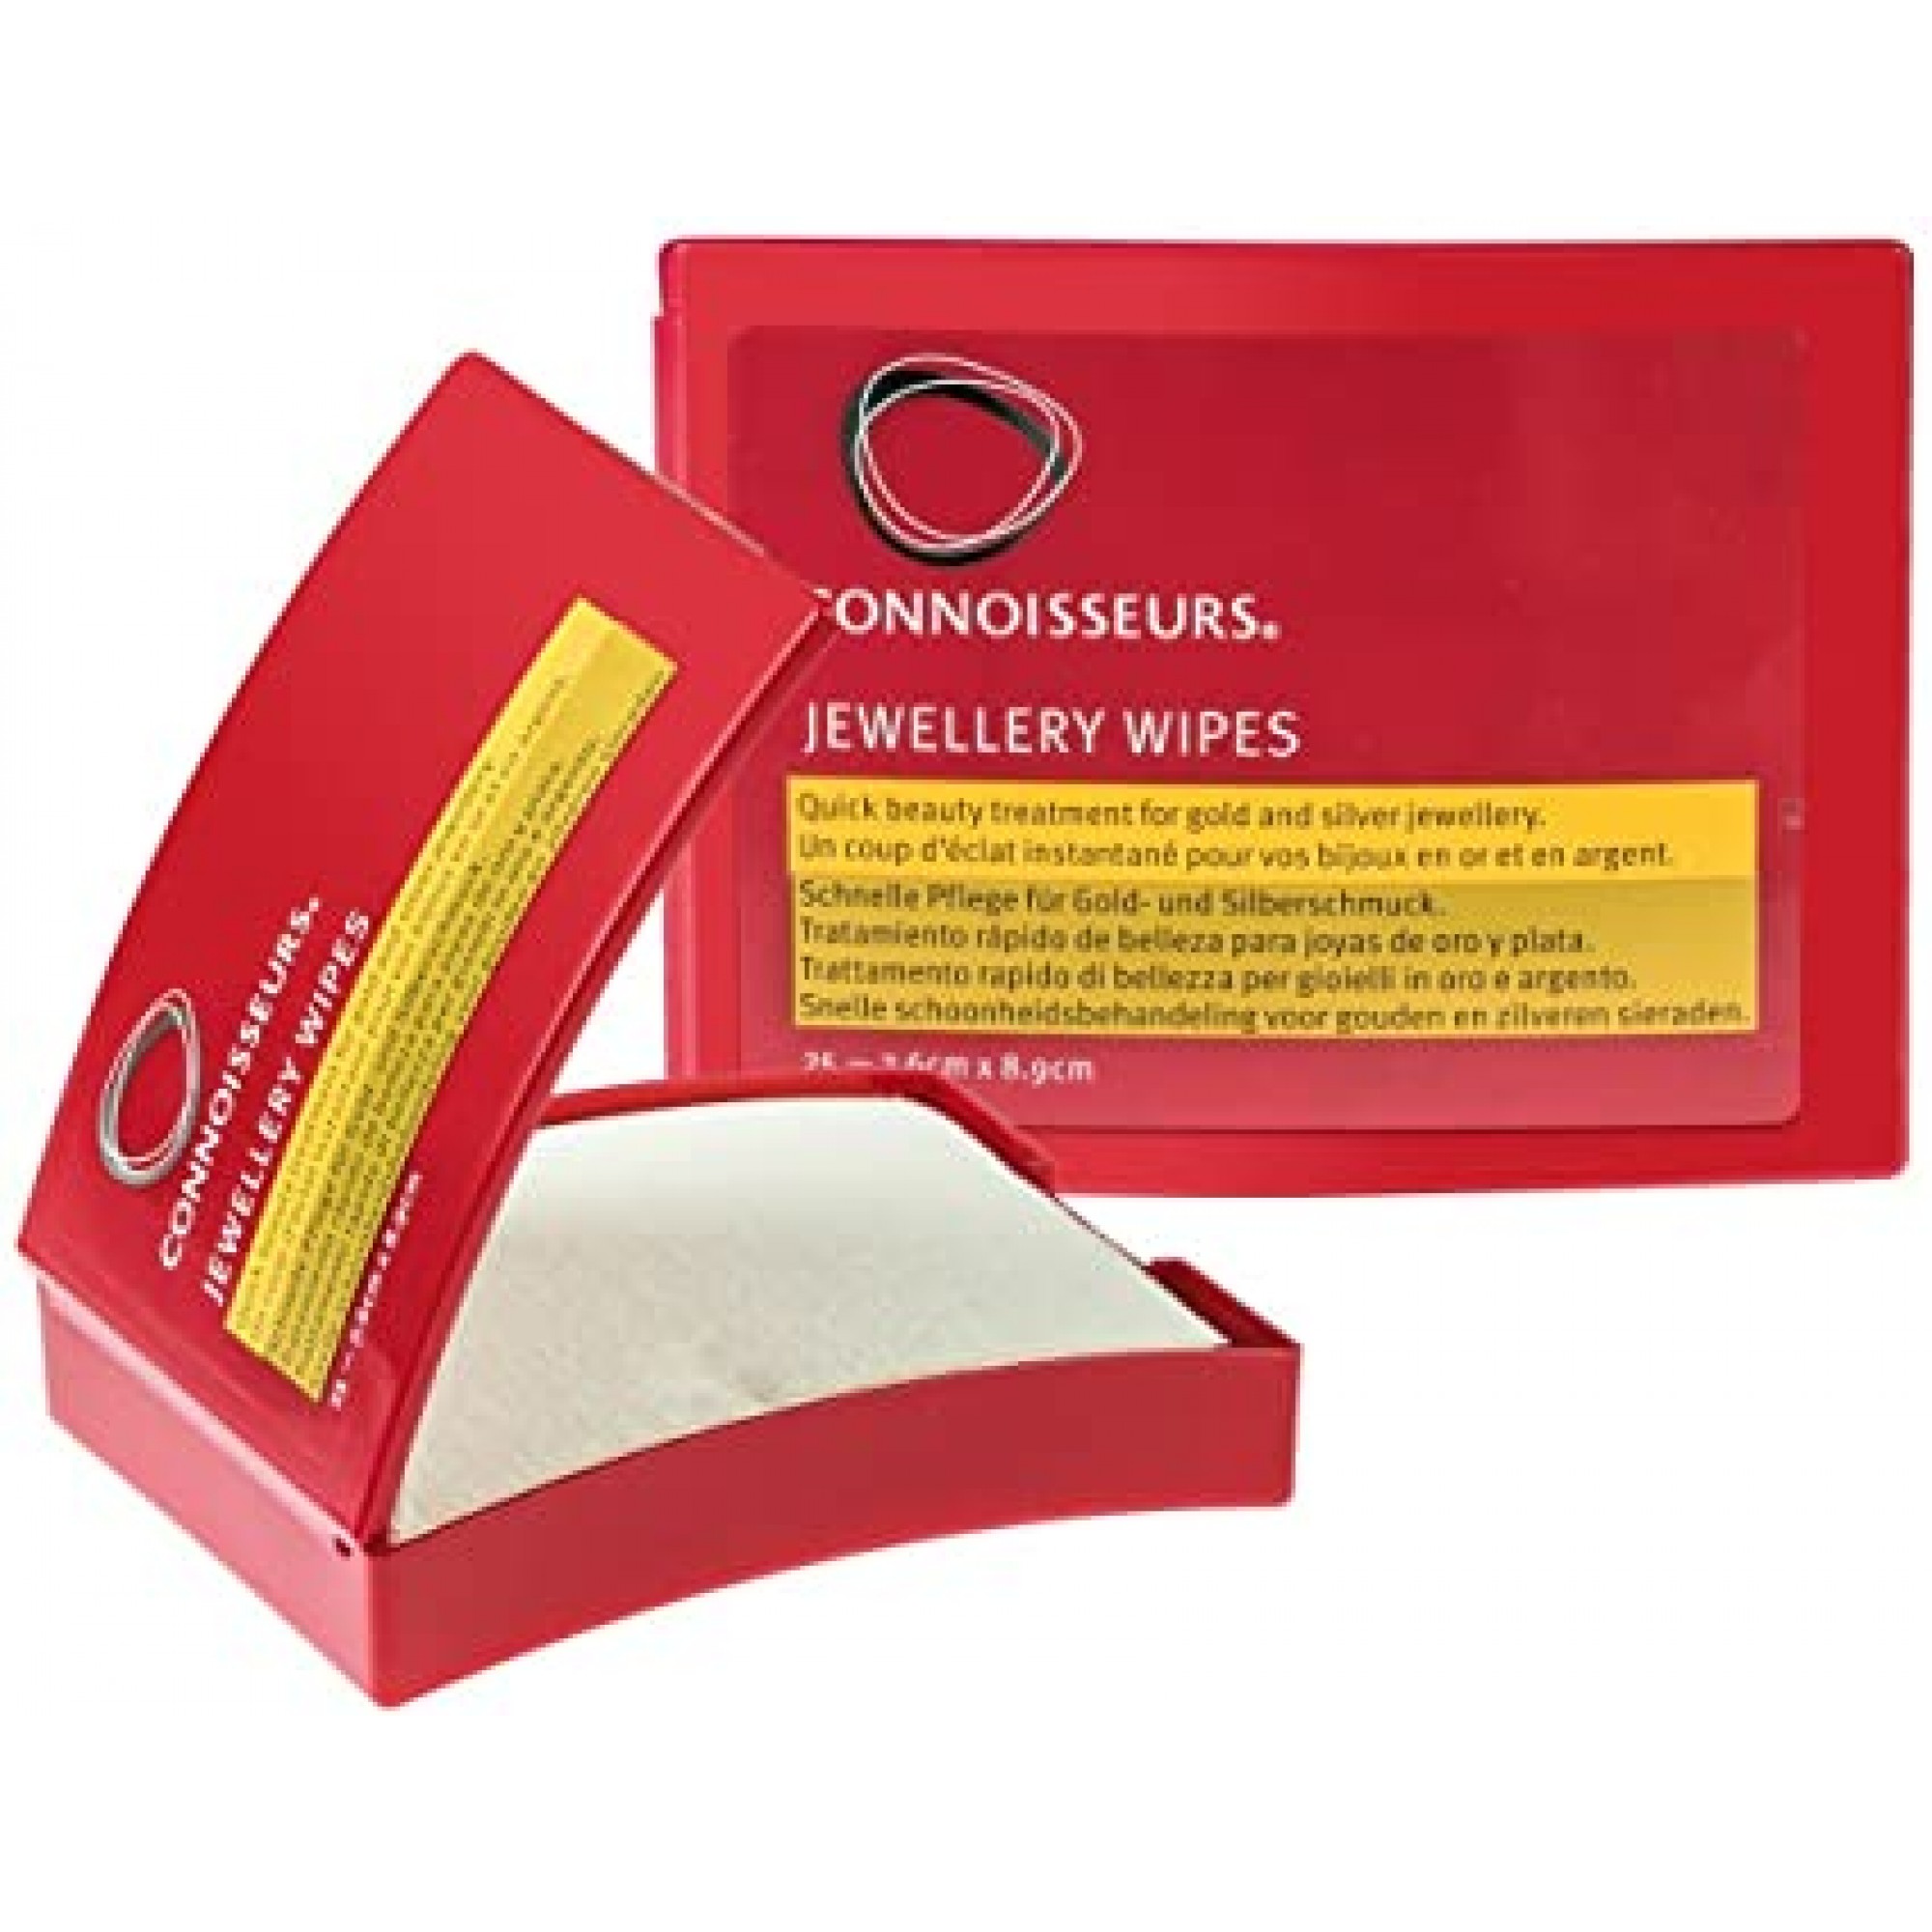 Connoisseurs Jewellery Wipes Compact